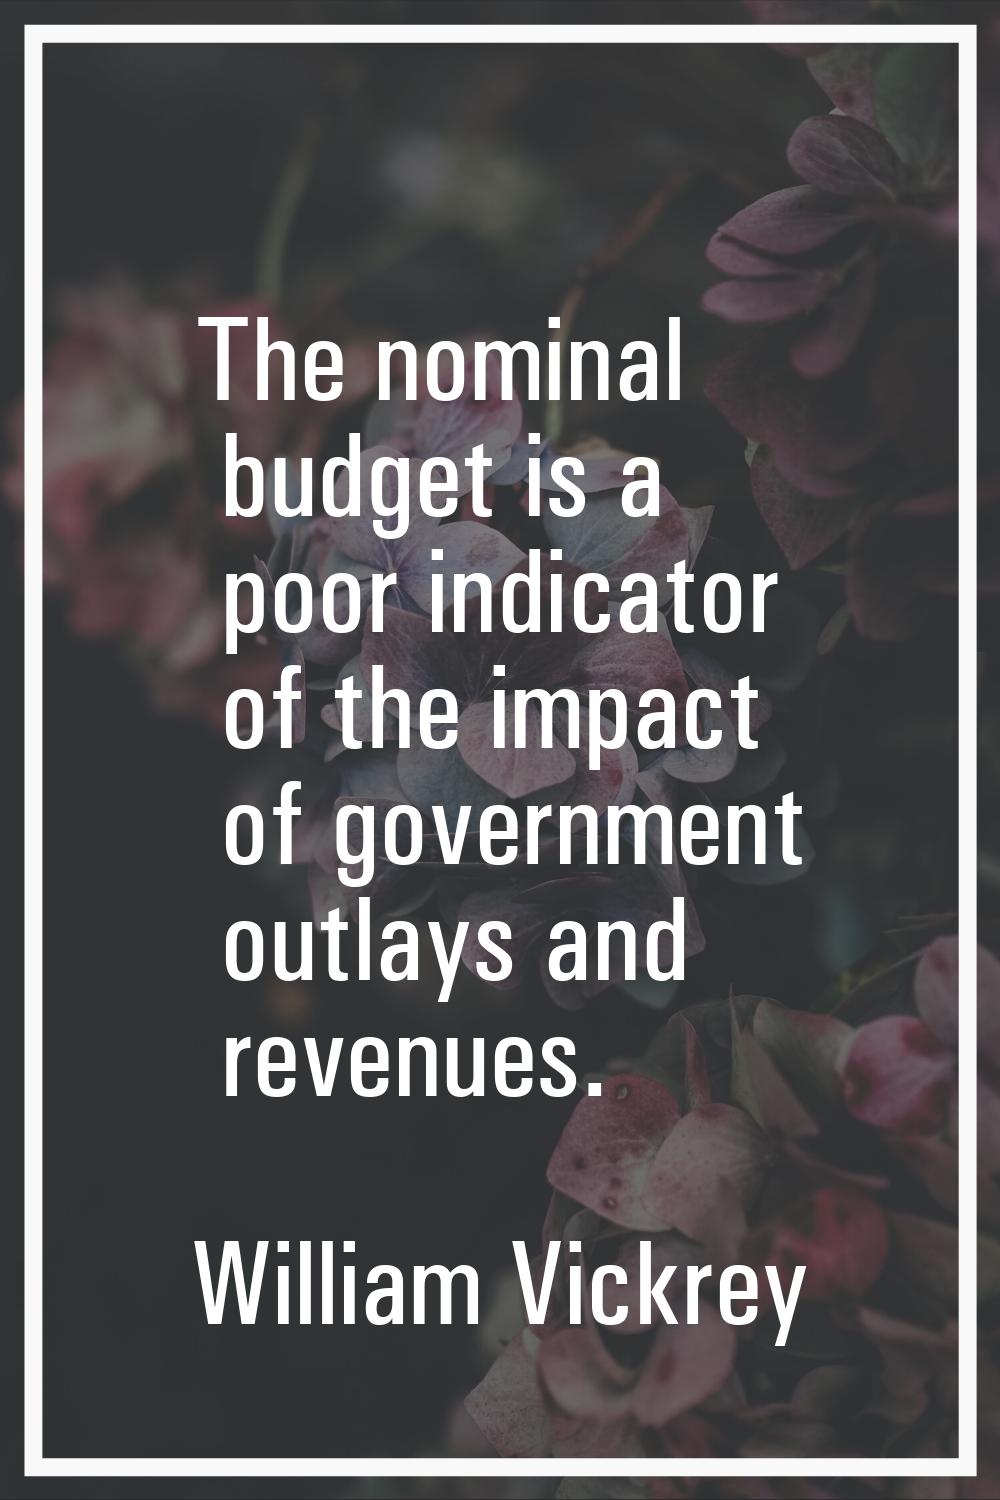 The nominal budget is a poor indicator of the impact of government outlays and revenues.